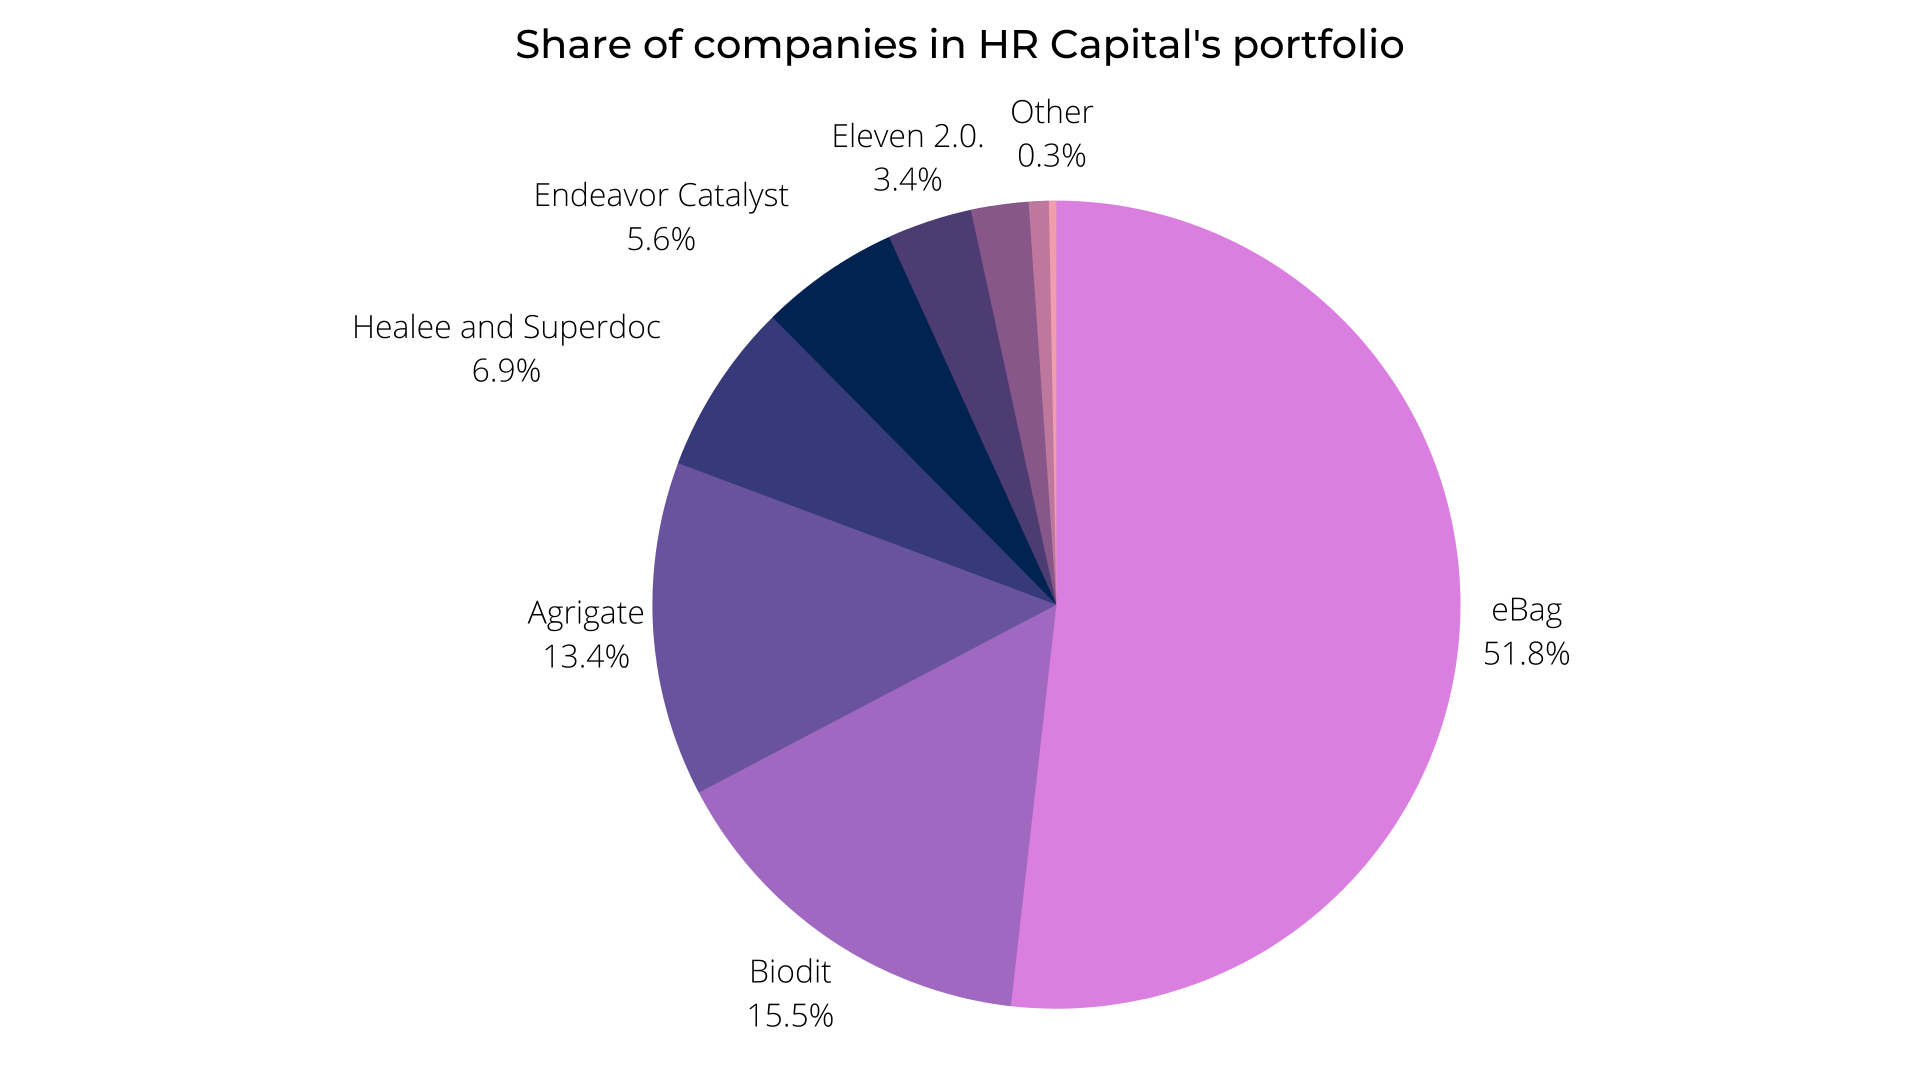 Share of companies in the portfolio of HR Capital